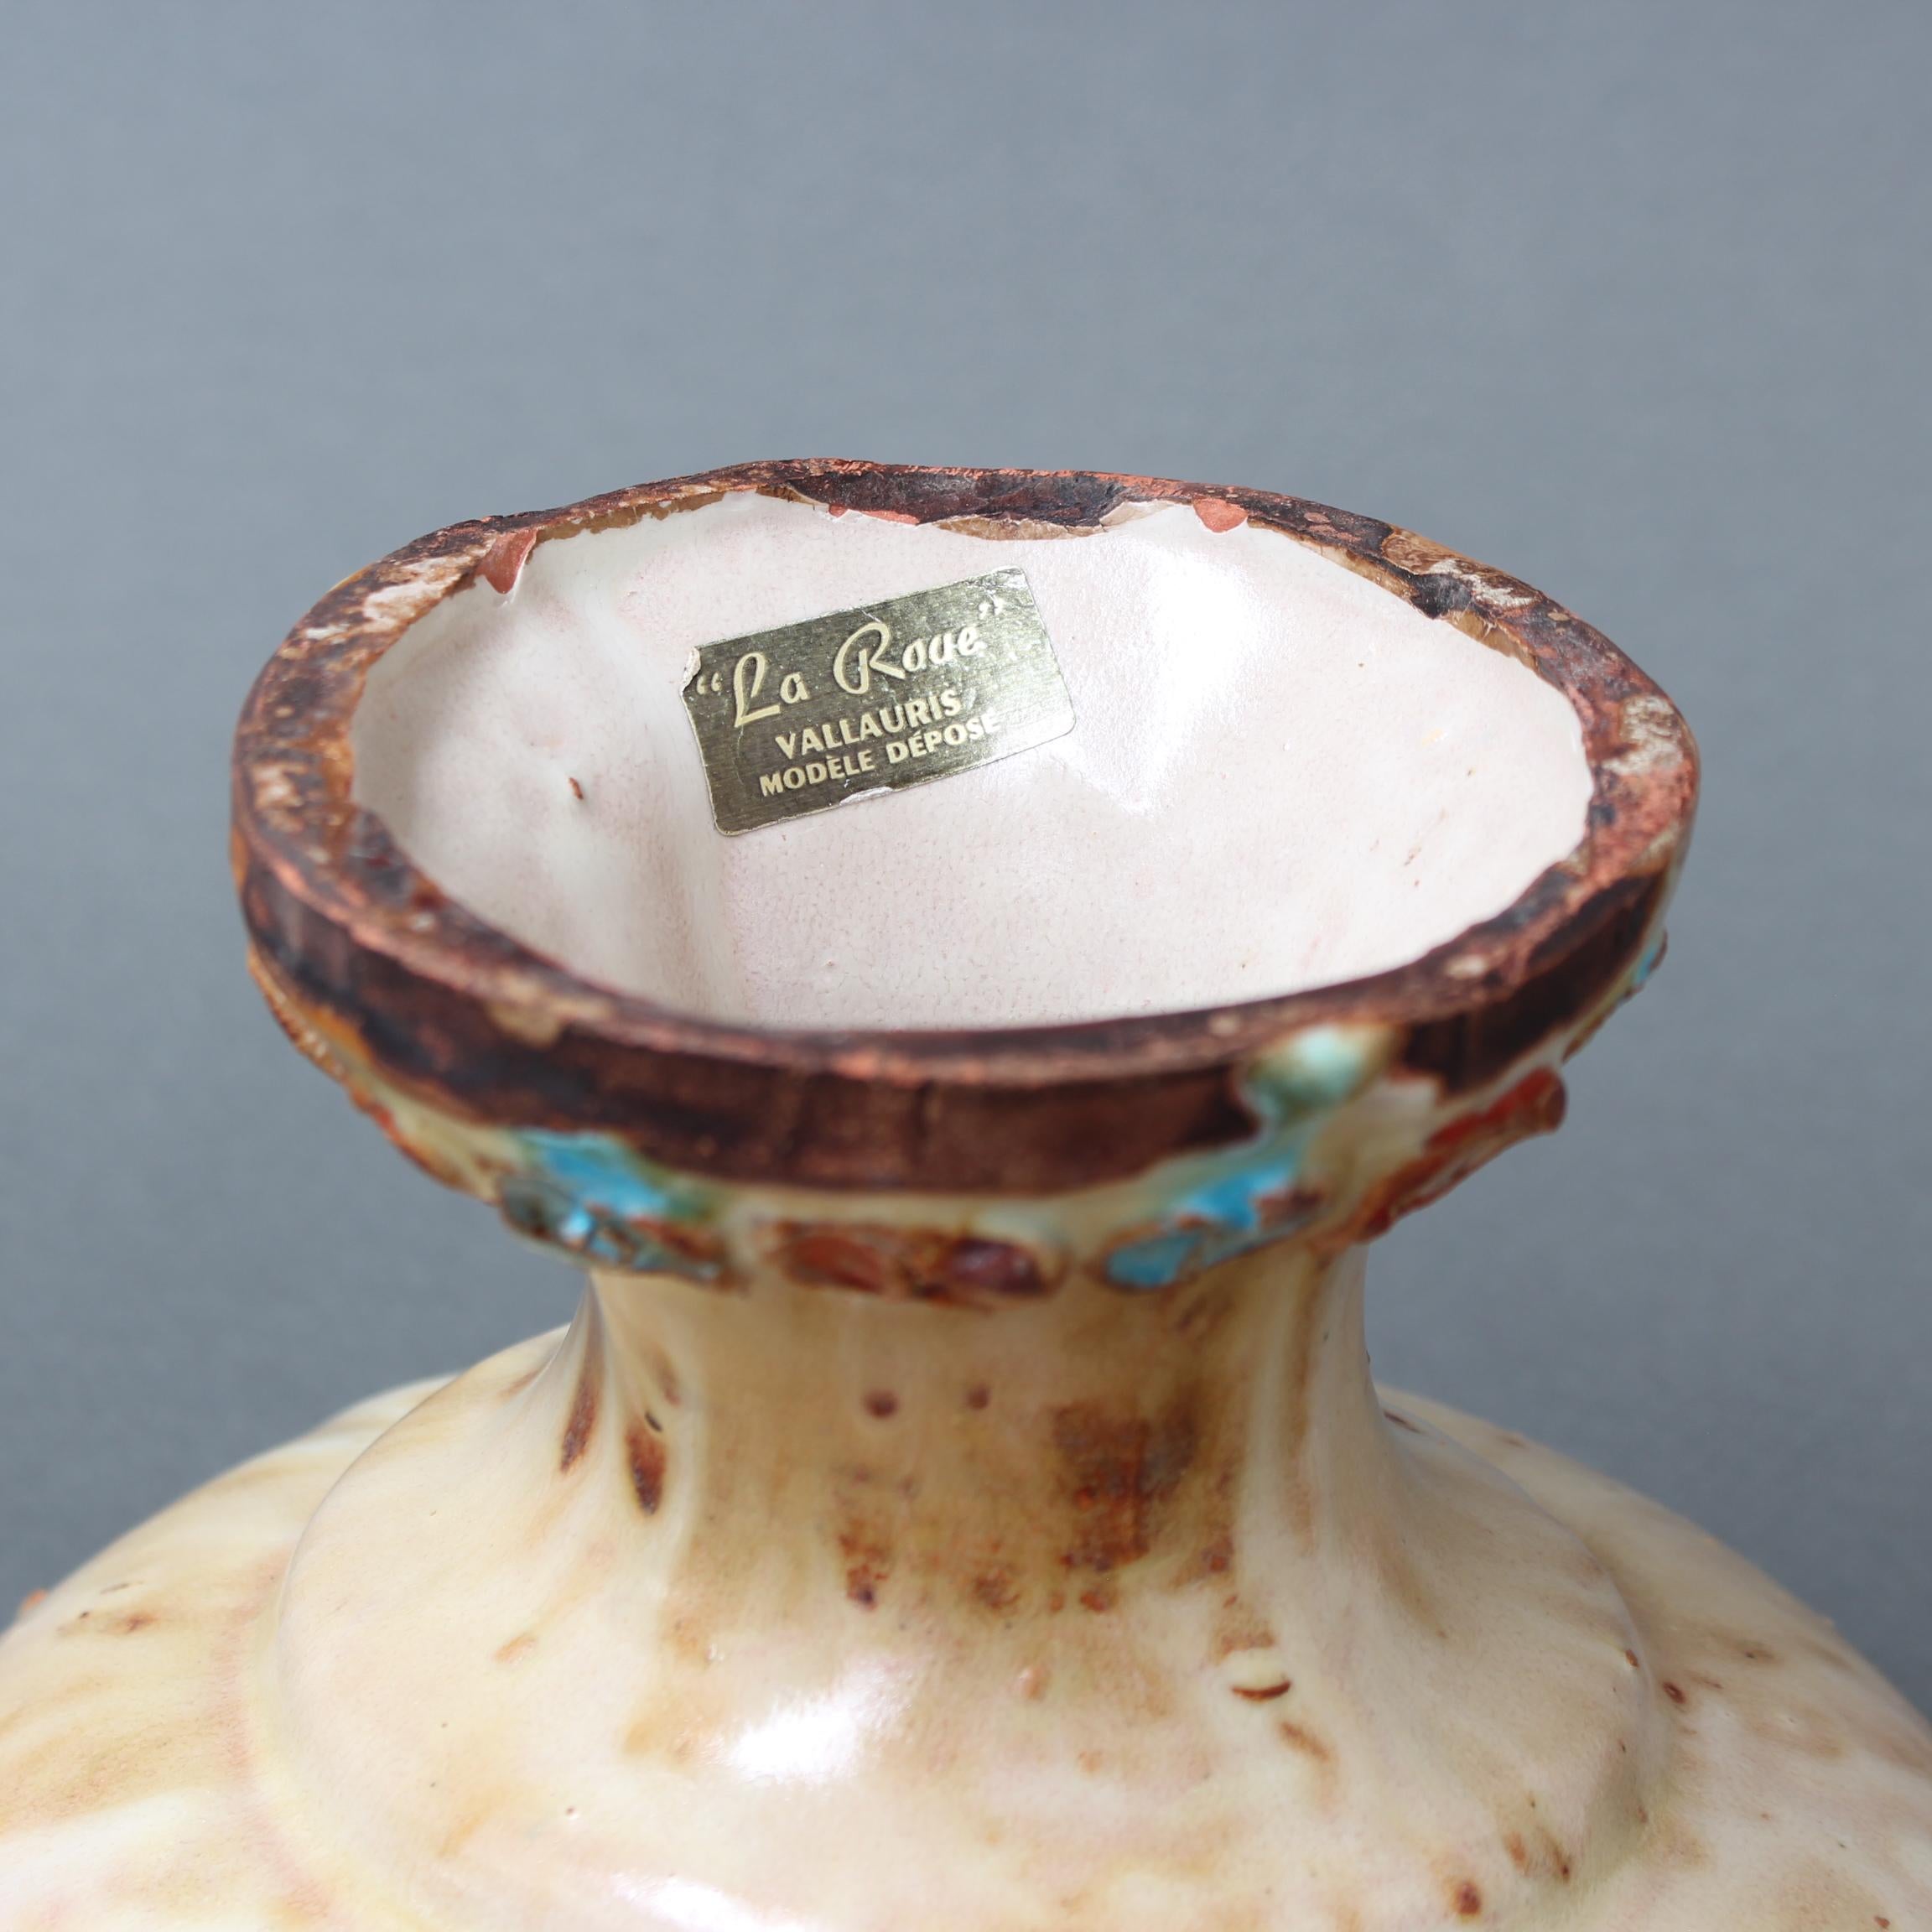 Vintage French Ceramic Candle-Holder by La Roue (circa 1960s) For Sale 5